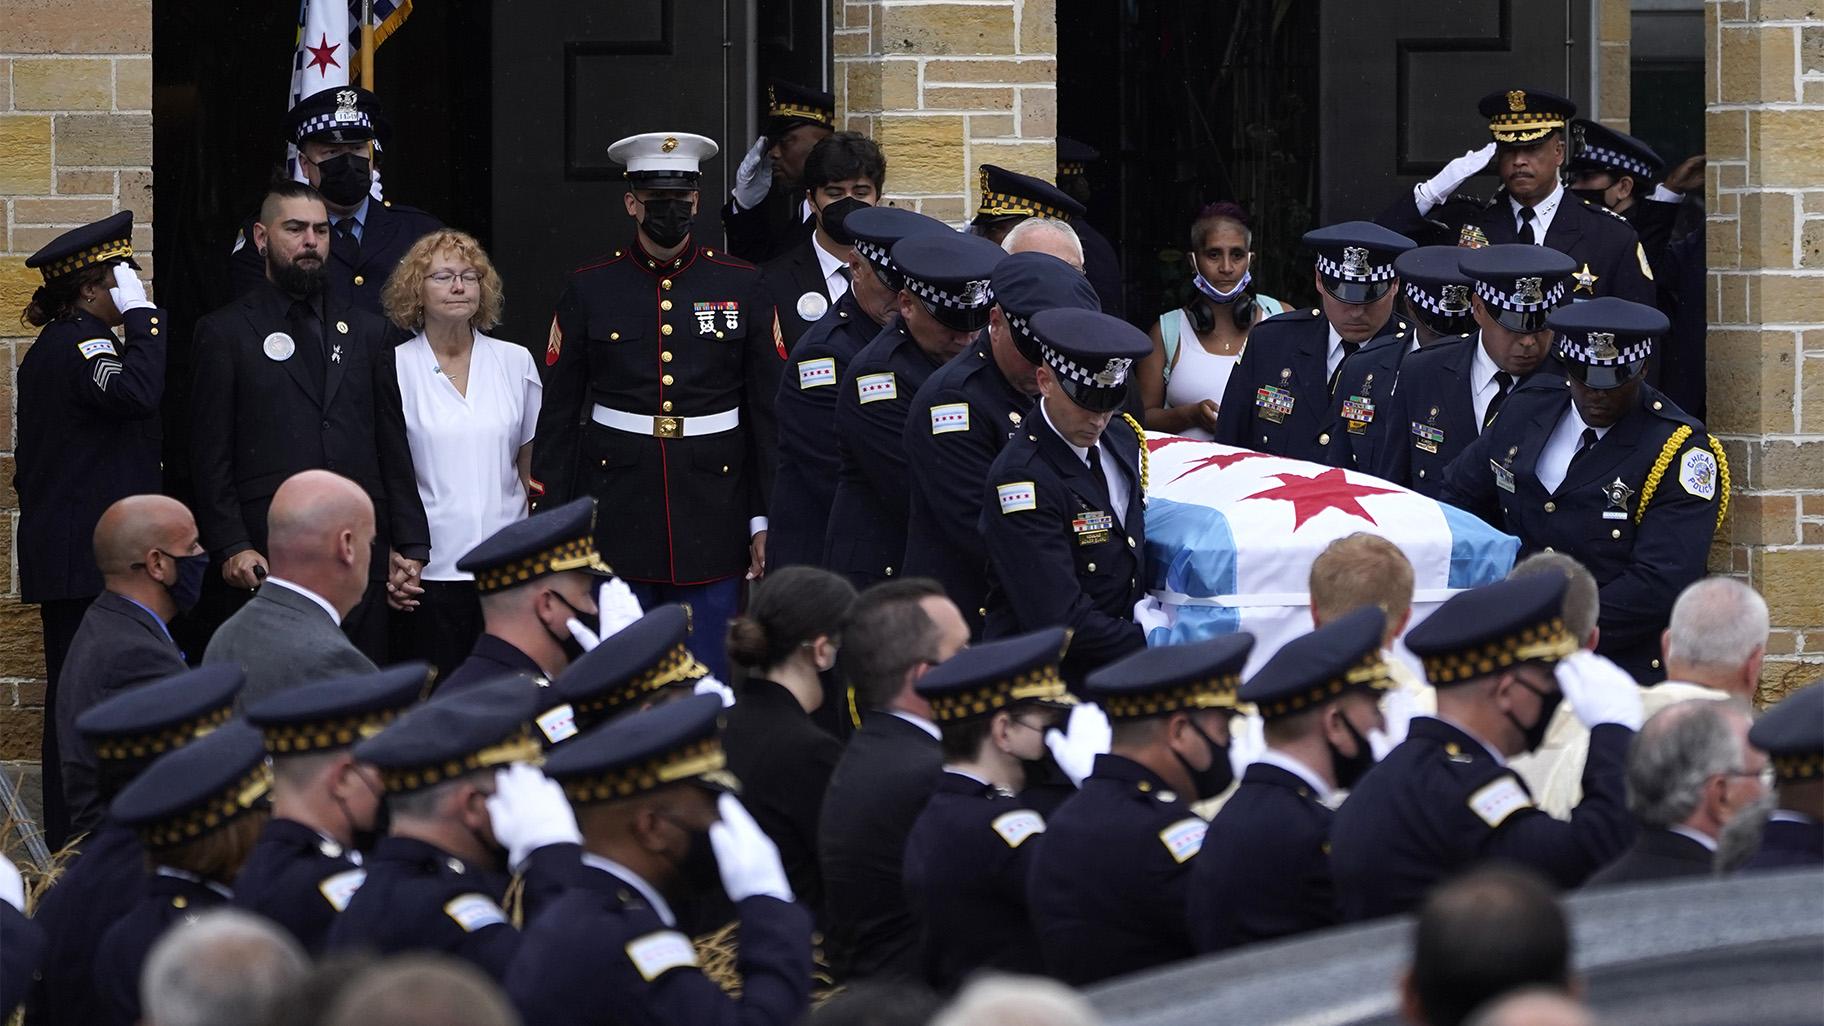 Elizabeth French, in white, and her son Andrew, left, follow the casket of her daughter, Chicago police officer Ella French, after a funeral service at the St. Rita of Cascia Shrine Chapel Thursday, Aug. 19, 2021, in Chicago.   (AP Photo / Charles Rex Arbogast, File)